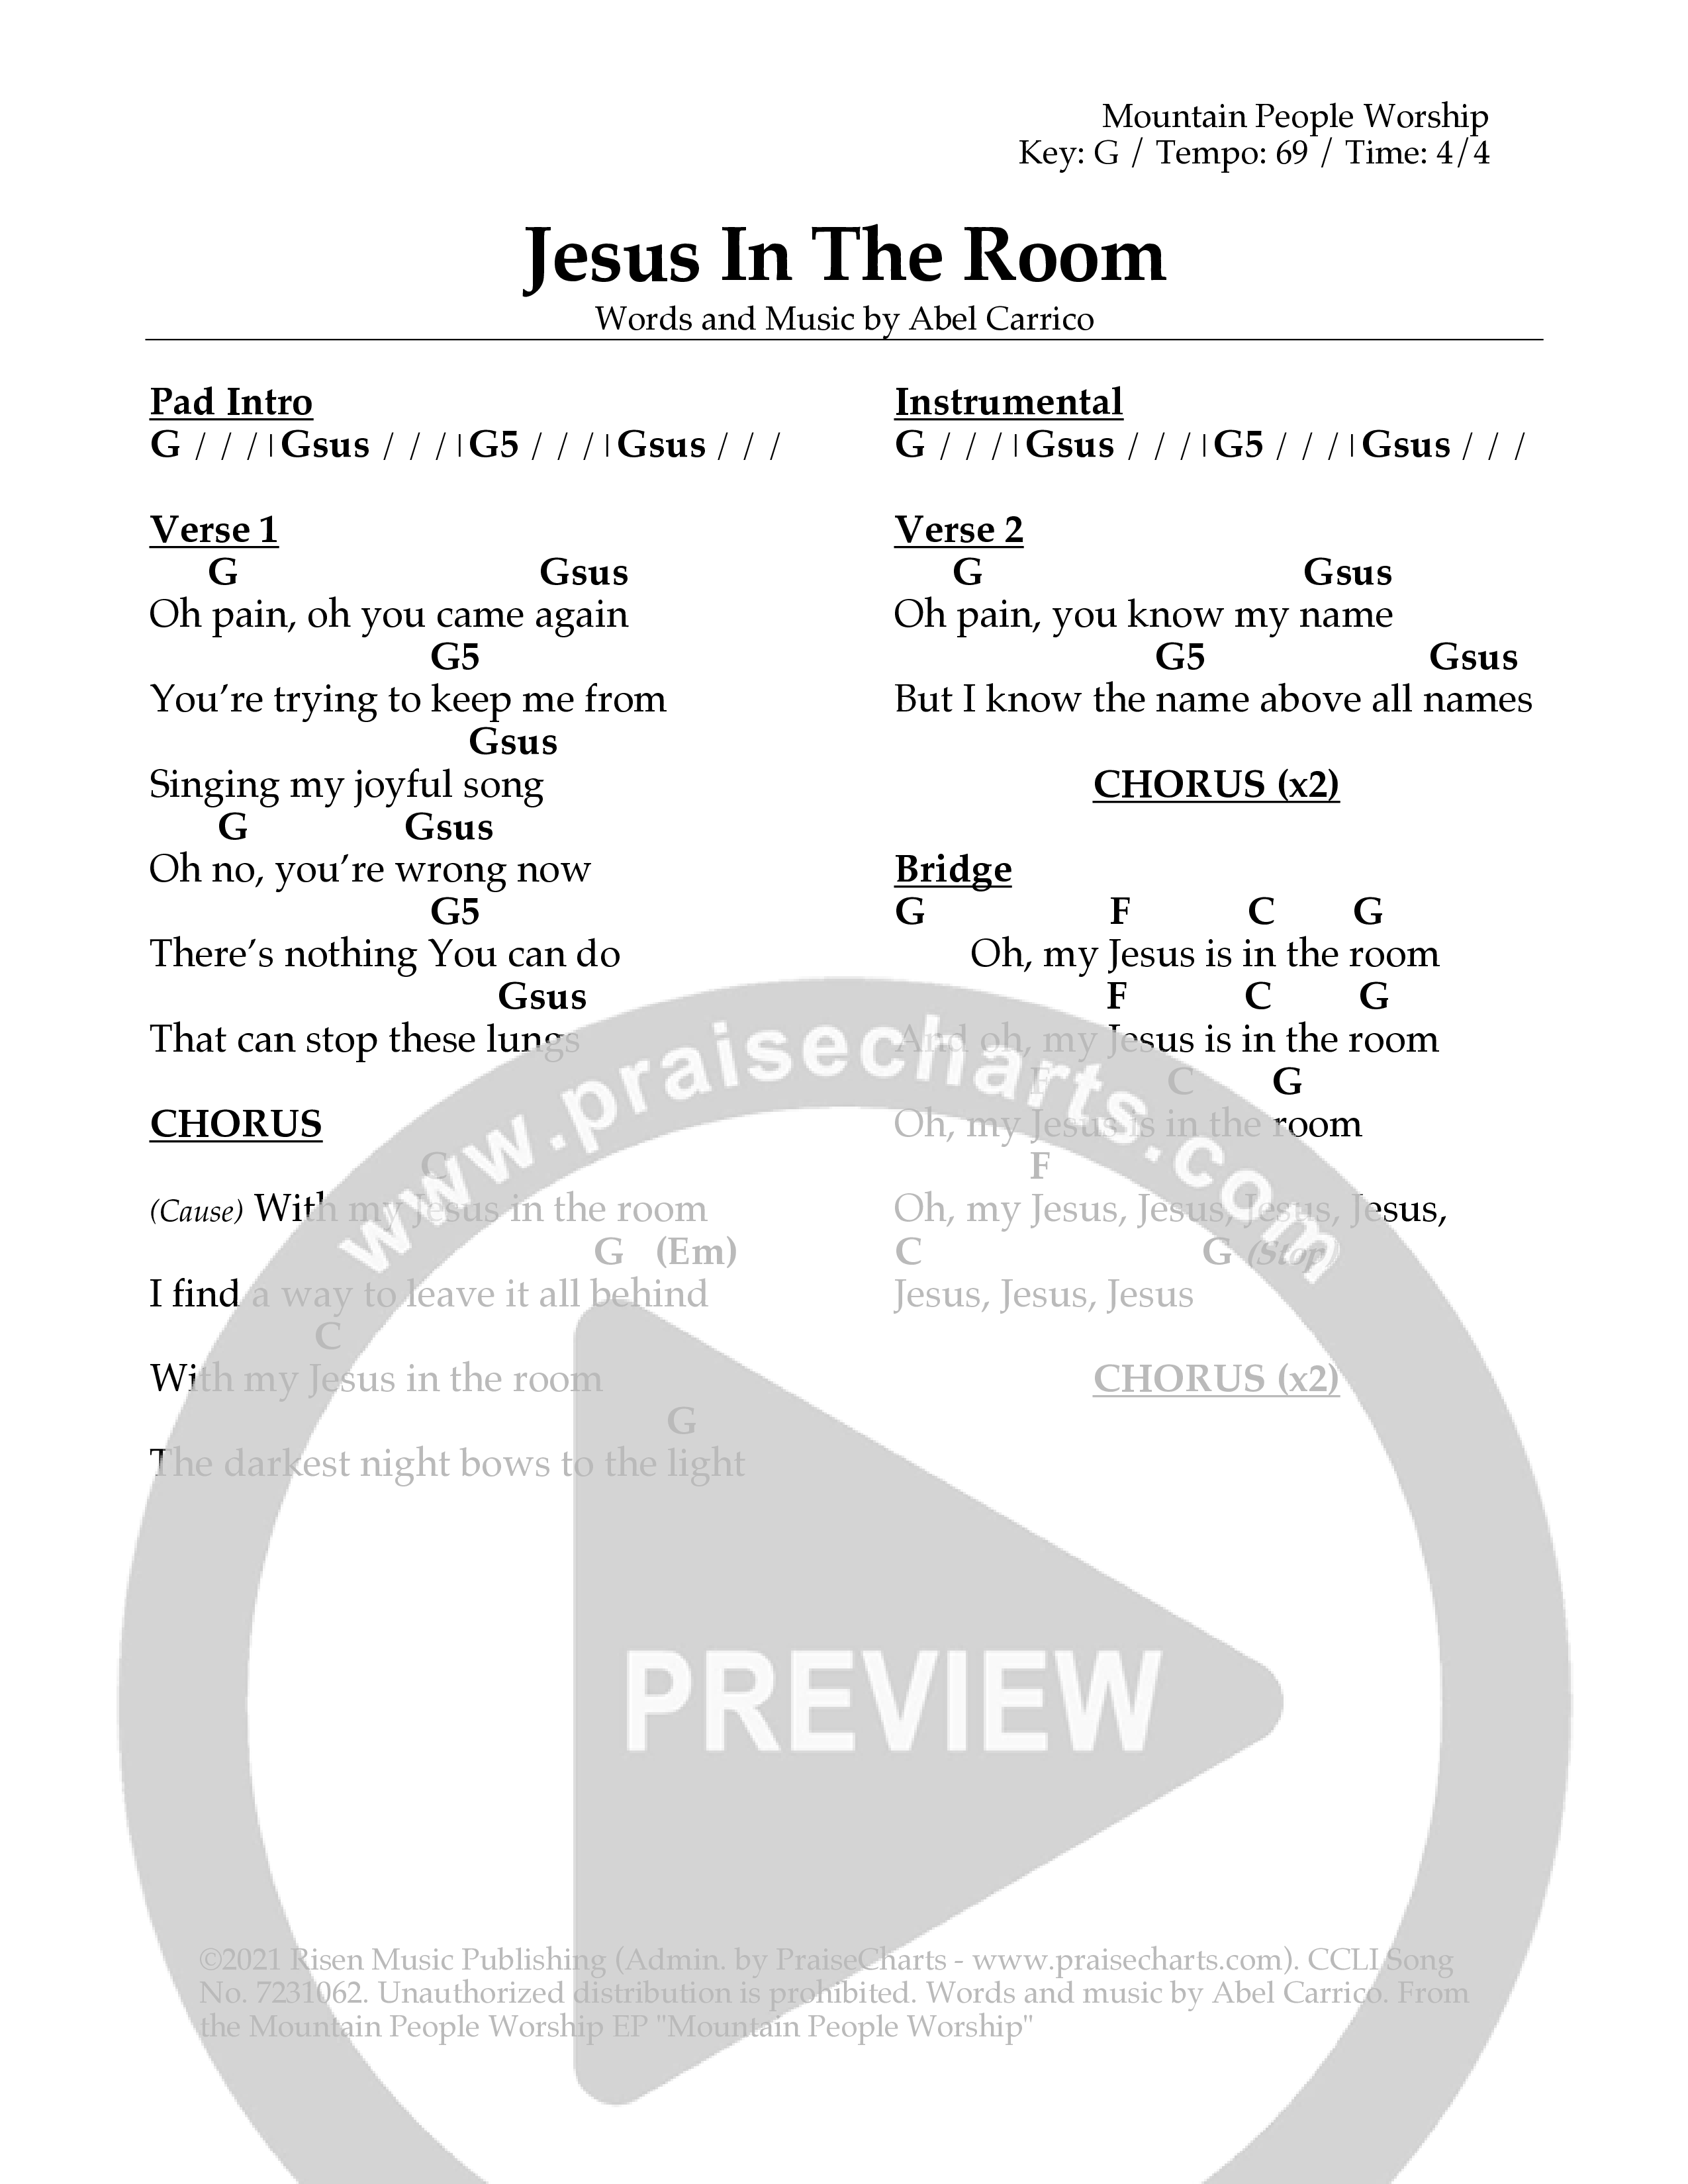 Jesus In The Room Chord Chart (Mountain People Worship)